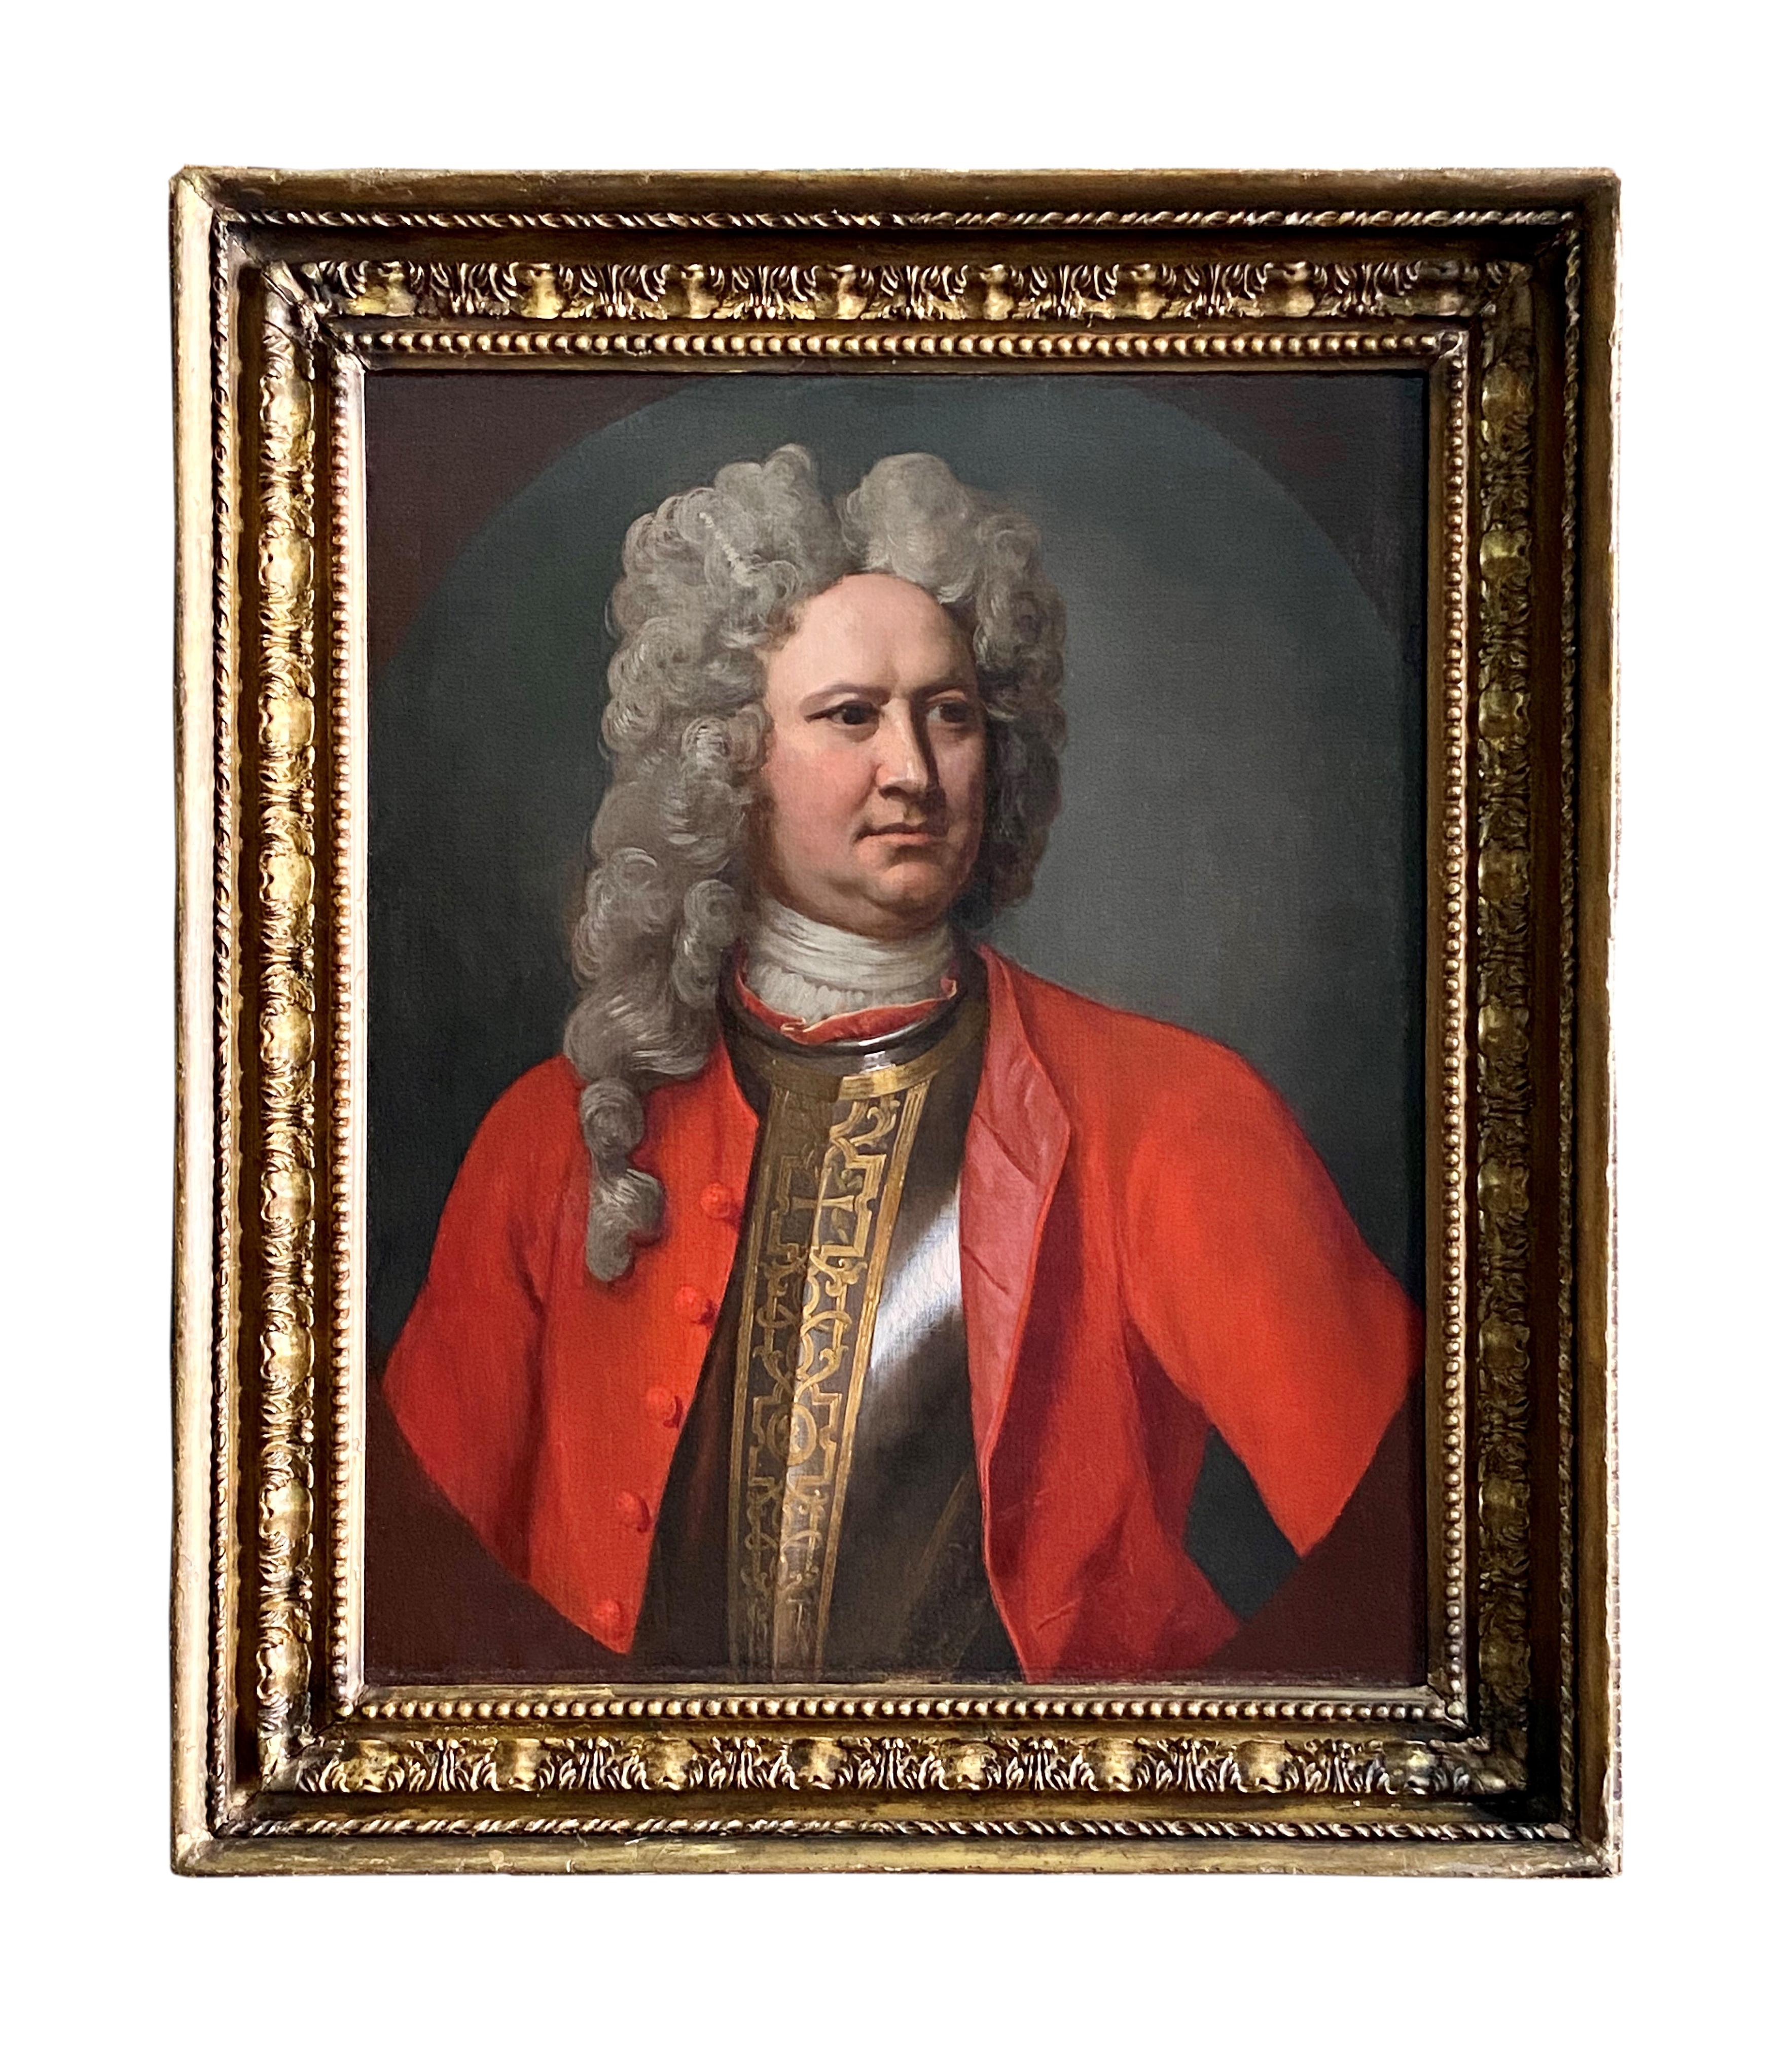 Unknown Portrait Painting - 18th CENTURY ENGLISH OIL PORTRAIT OF AN OFFICER  IN A RED COAT